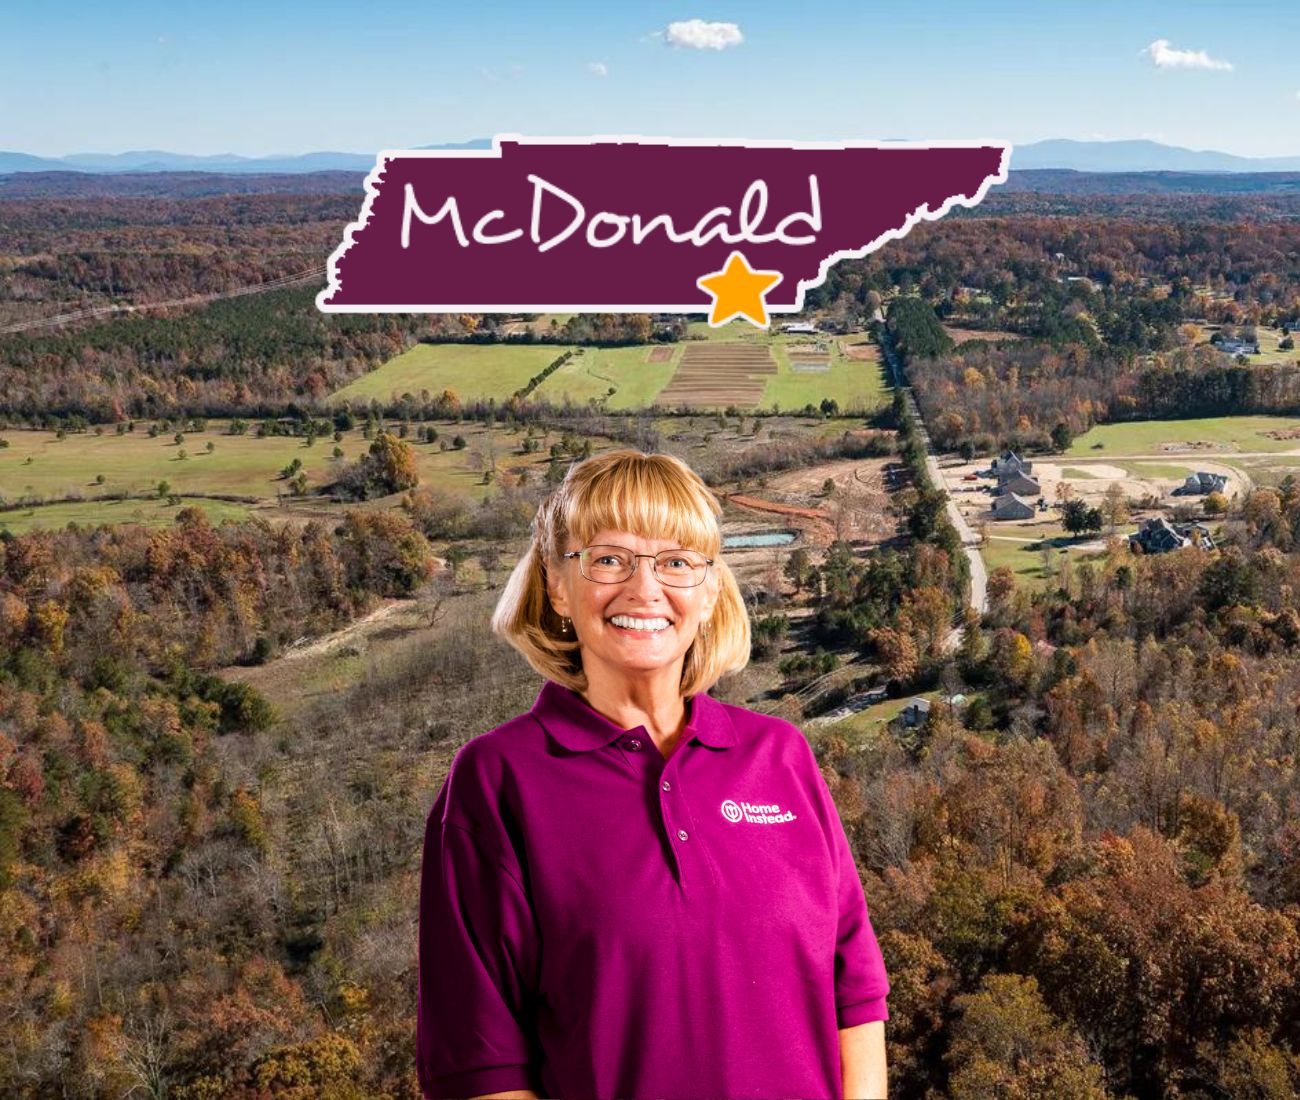 Home Instead caregiver with McDonald Tennessee in the background